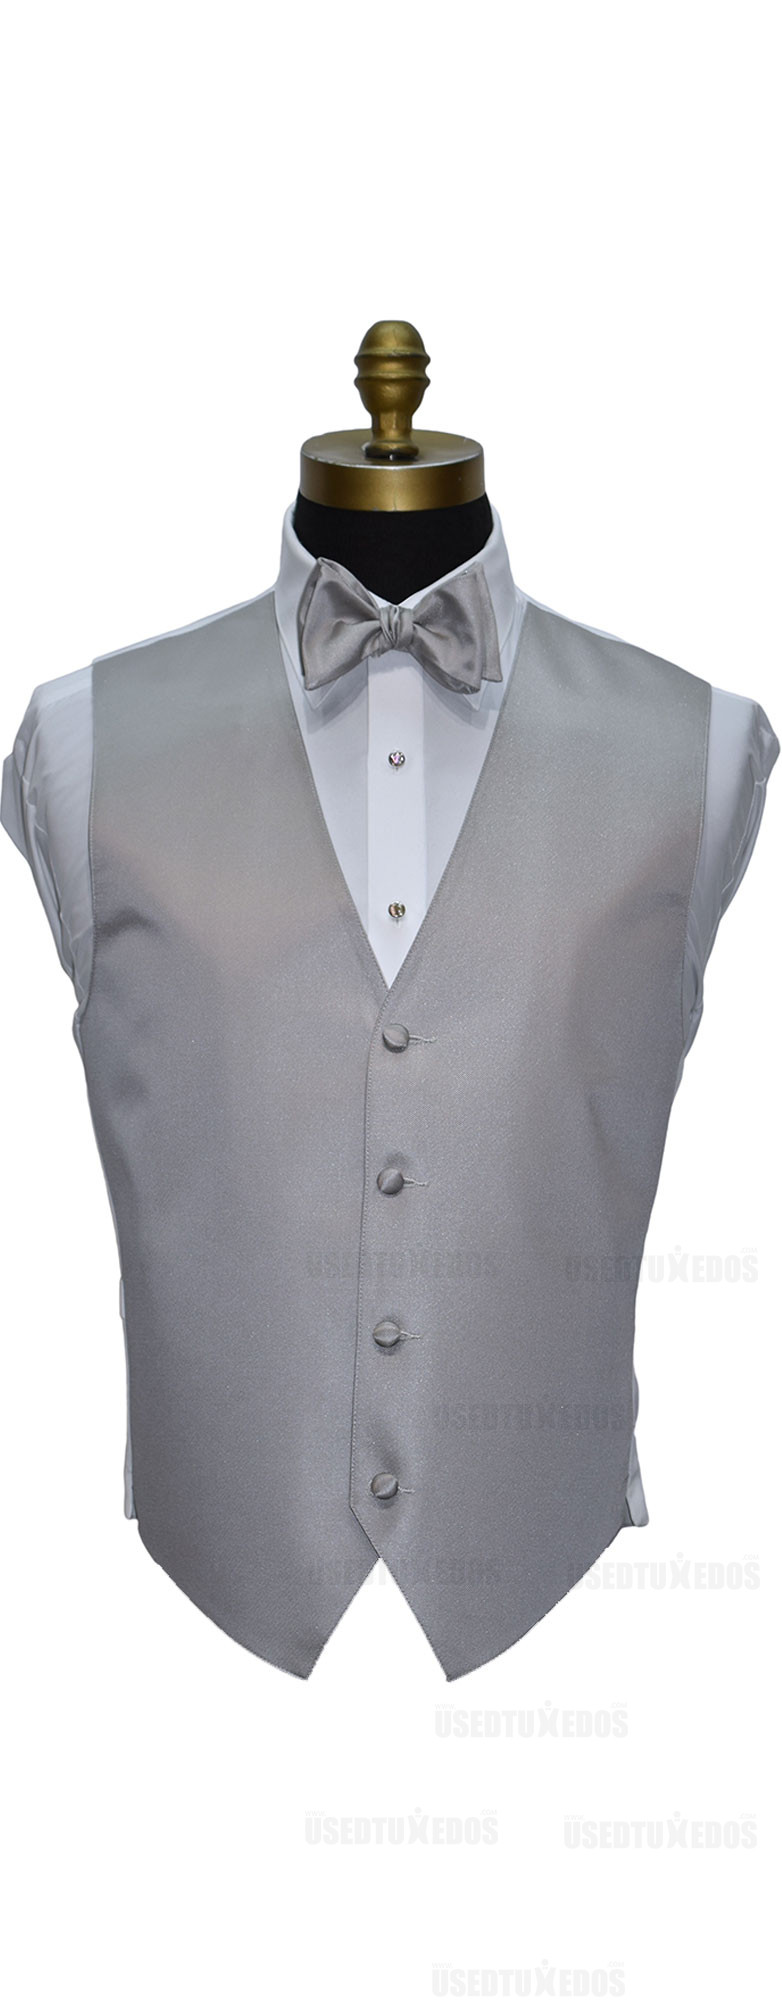 men's and boy's light gray vest and bowtie by San Miguel Formals